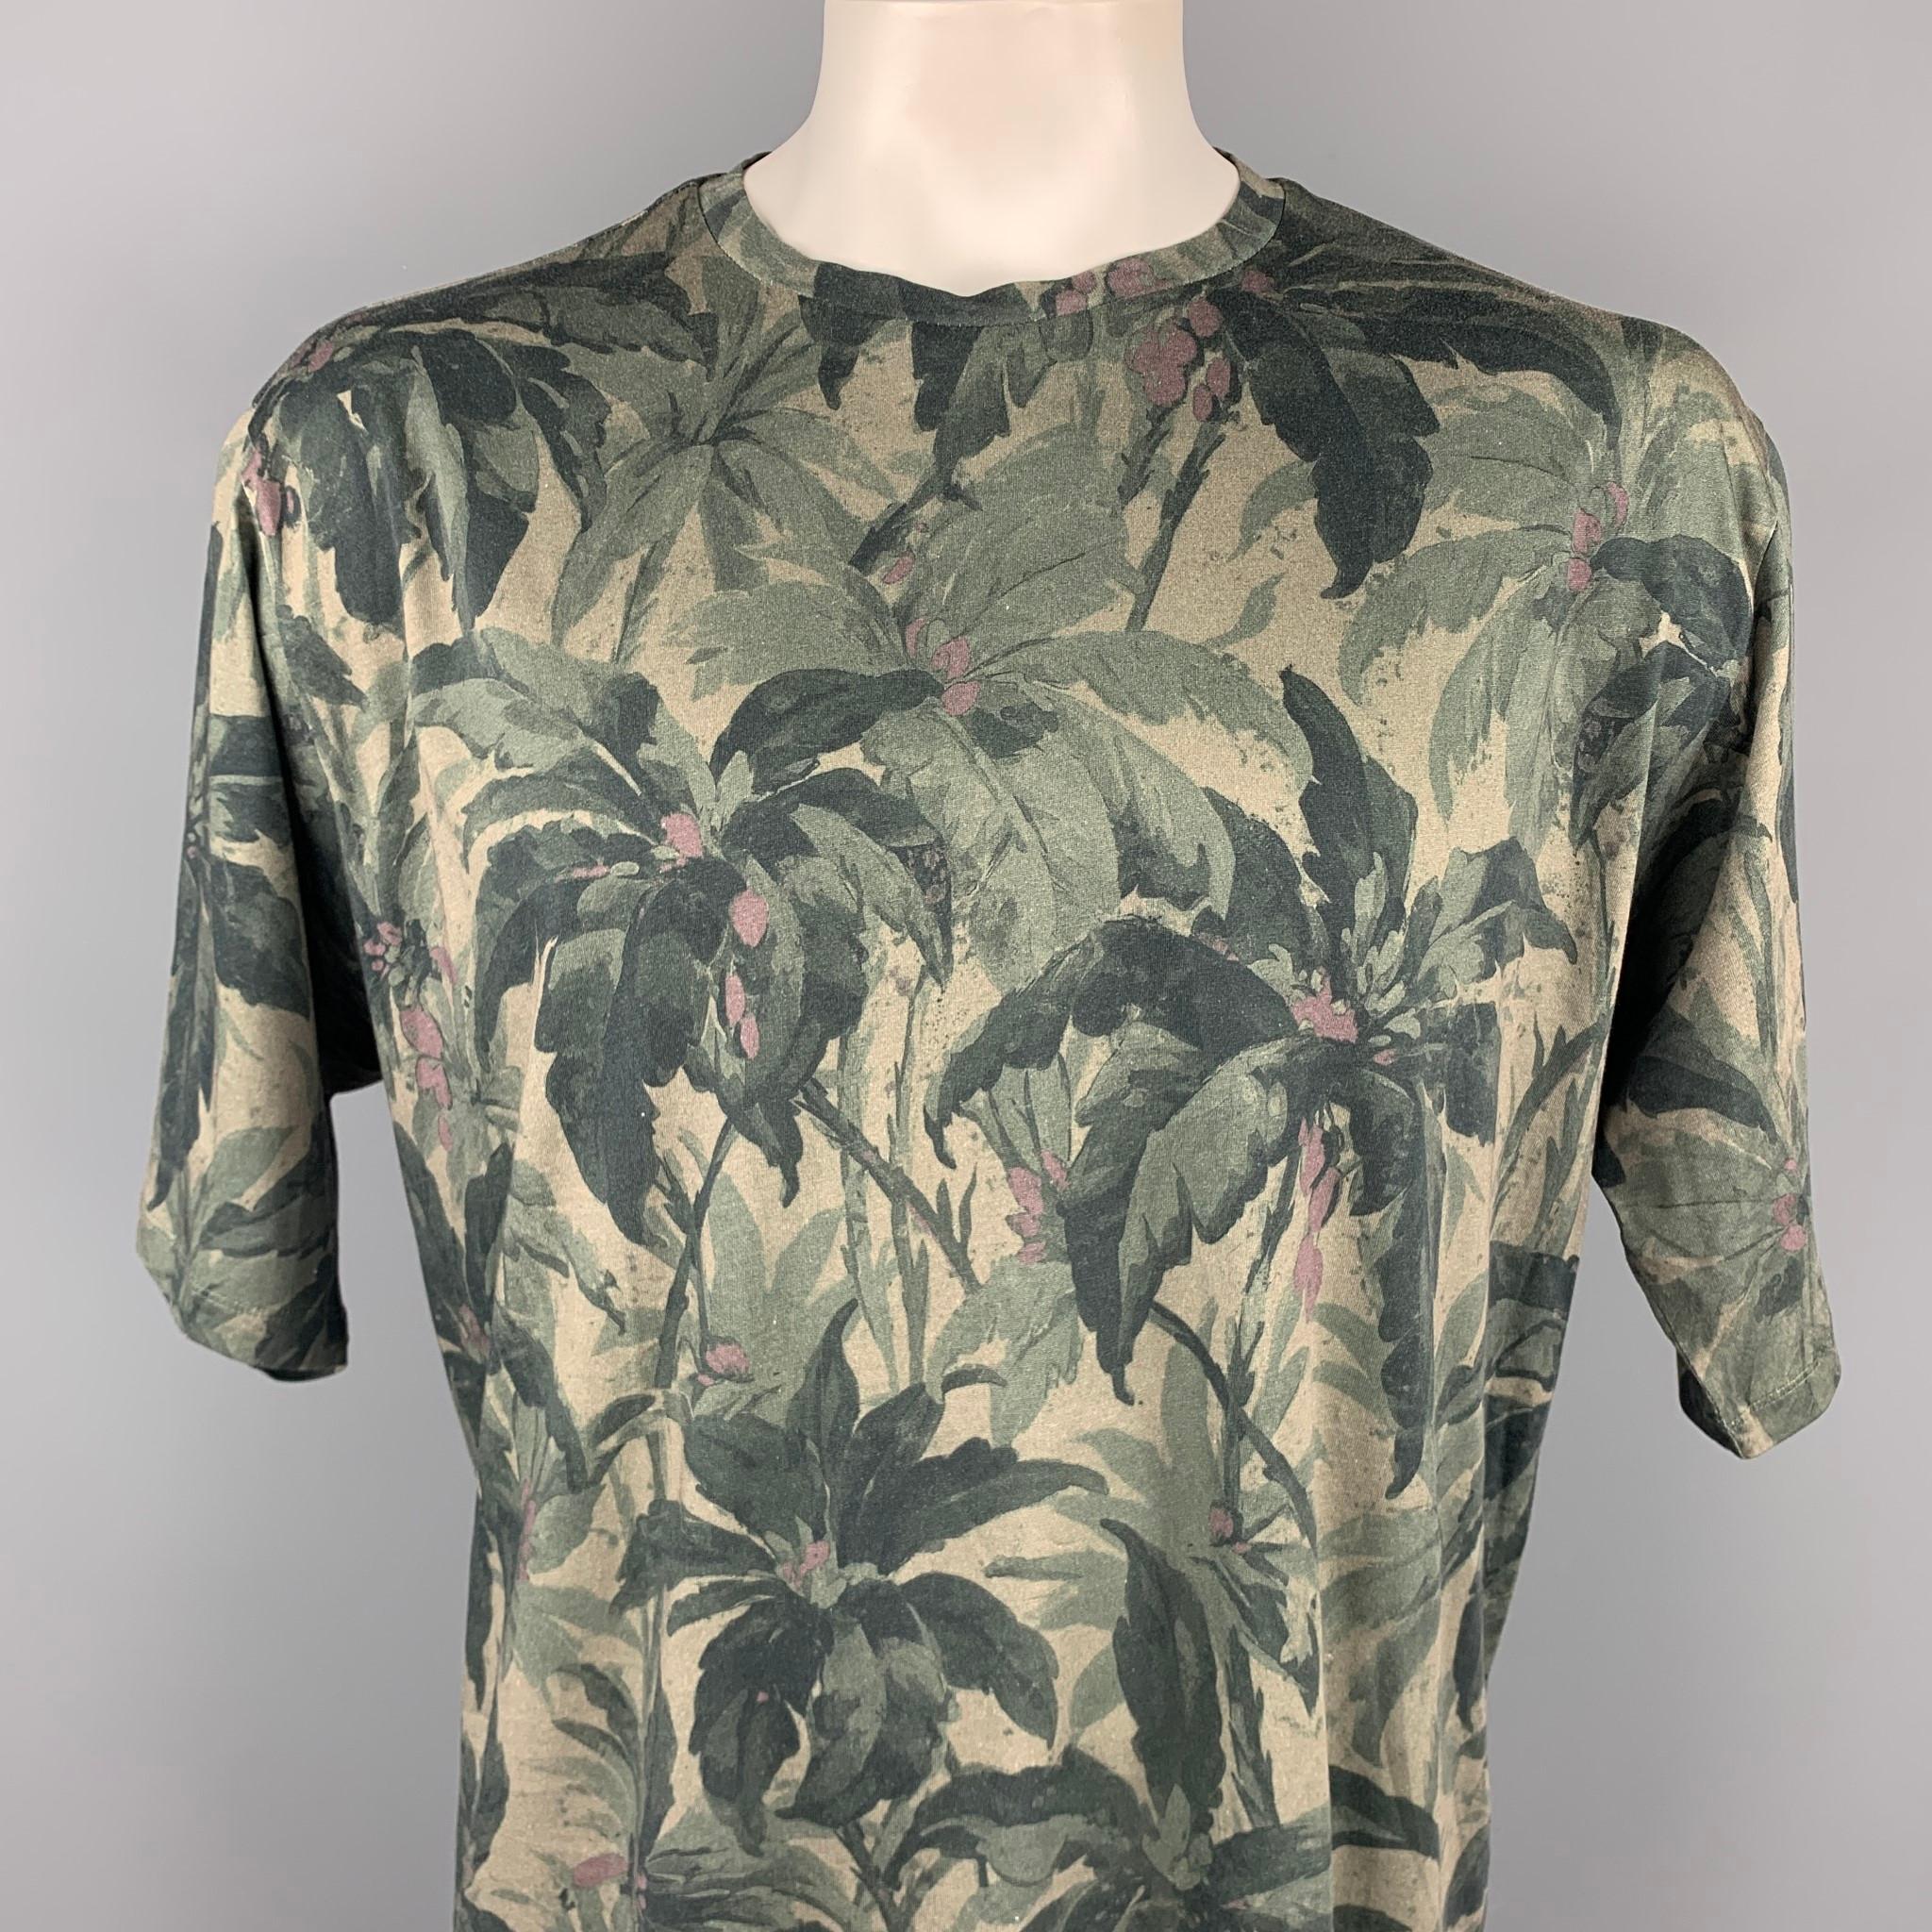 DRIES VAN NOTEN t-shirt comes in a olive print cotton featuring a oversized style and a crew-neck.

Excellent Pre-Owned Condition.
Marked: XL

Measurements:

Shoulder: 22.5 in.
Chest: 50 in. 
Sleeve: 12.5 in. 
Length: 30 in. 